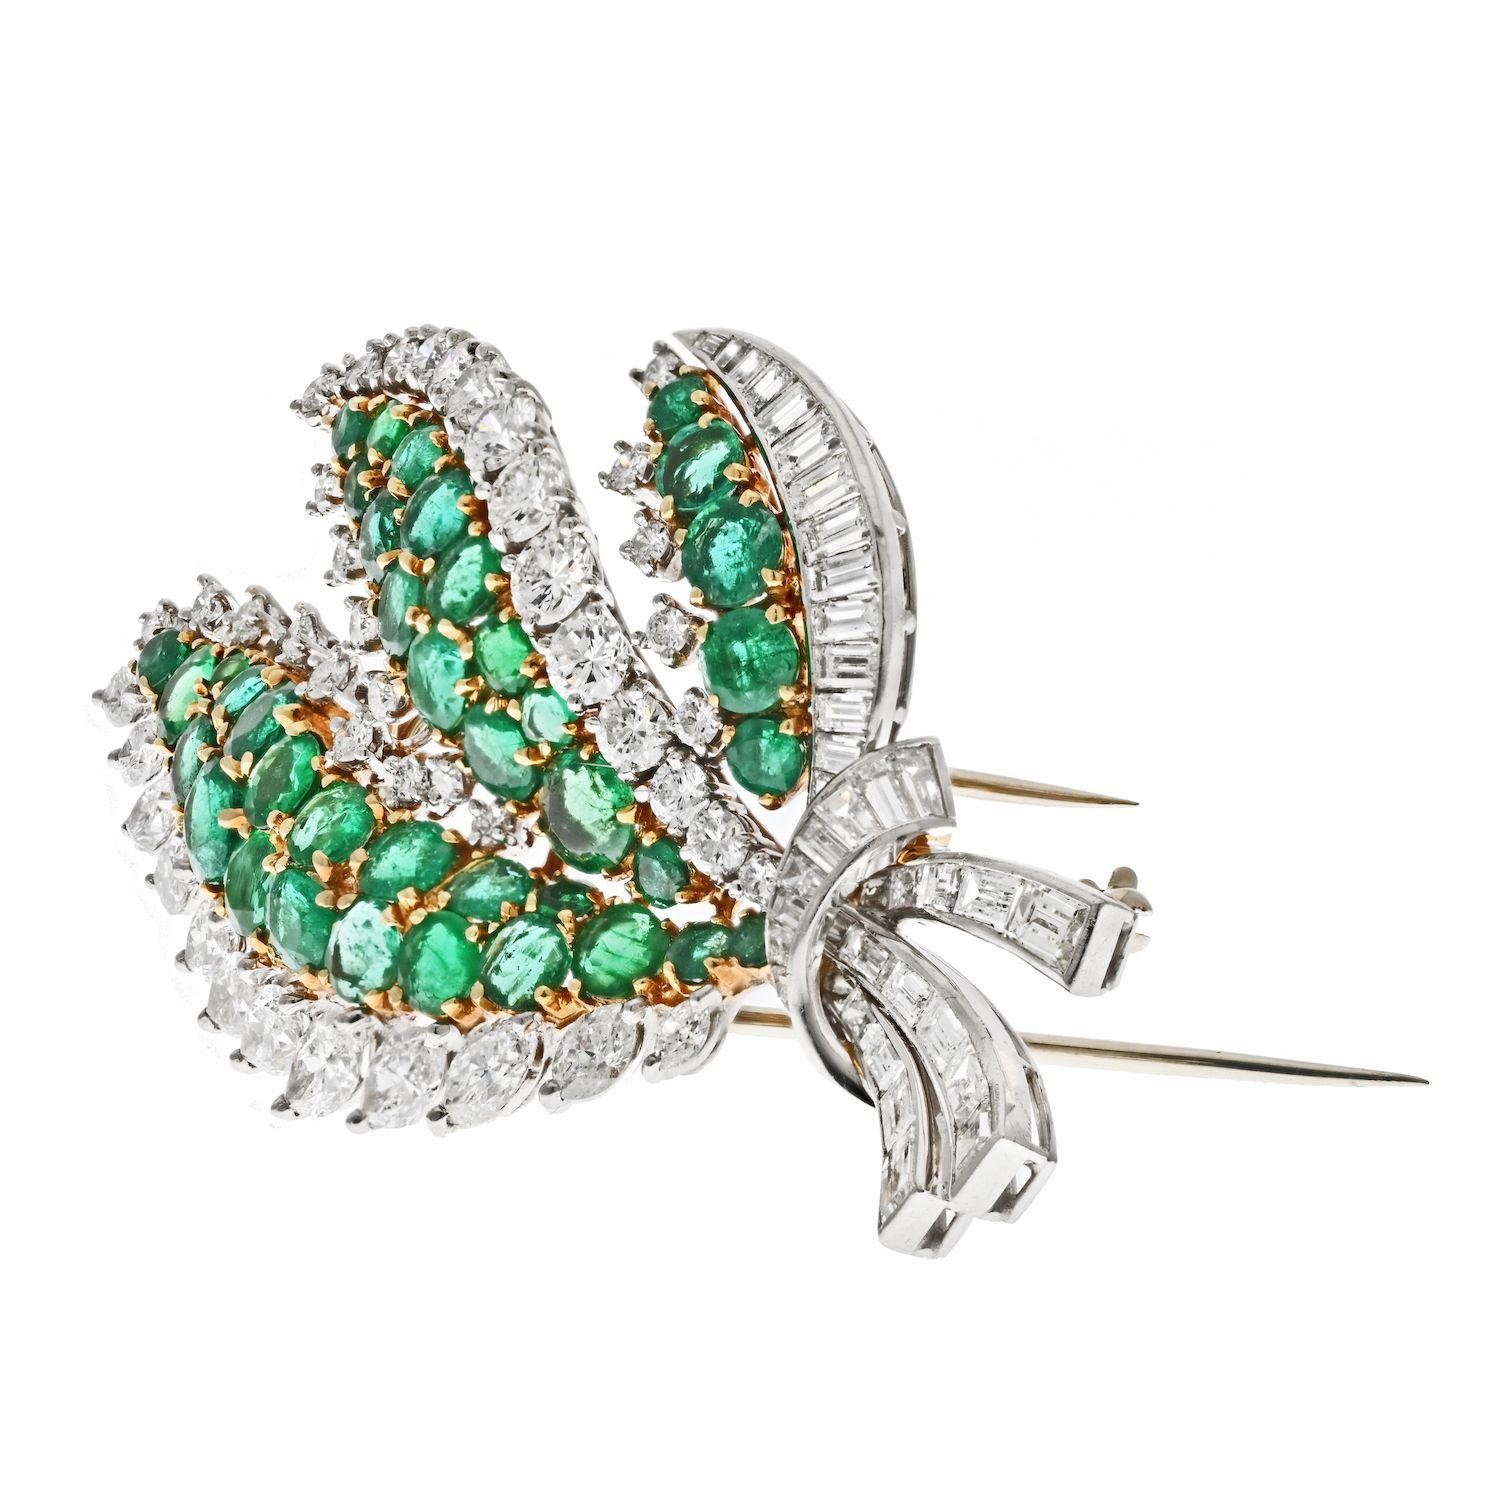 This Platinum & 18K Yellow Gold Diamond and Green Emerald Leaf Brooch is a beautiful and unique piece of jewelry that makes a lovely gift. It features a beautiful leaf design, crafted with 18K yellow gold and studded with various shape diamonds and